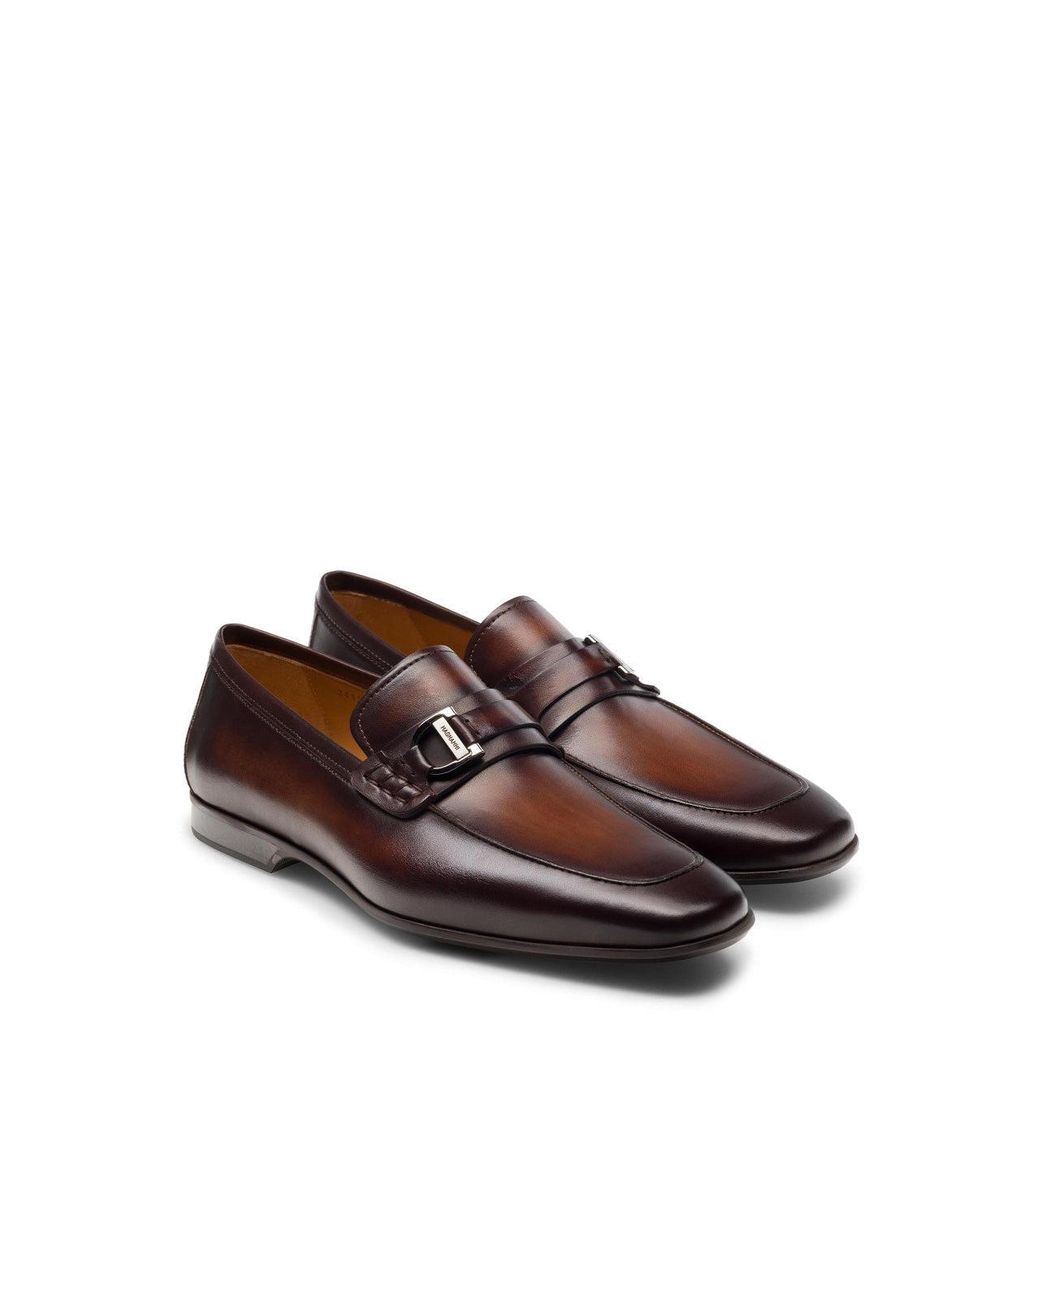 Magnanni 24379 Raso Shoes Calf-skin Leather Slip-on Penny Loafers  (mags1079) in Brown for Men | Lyst